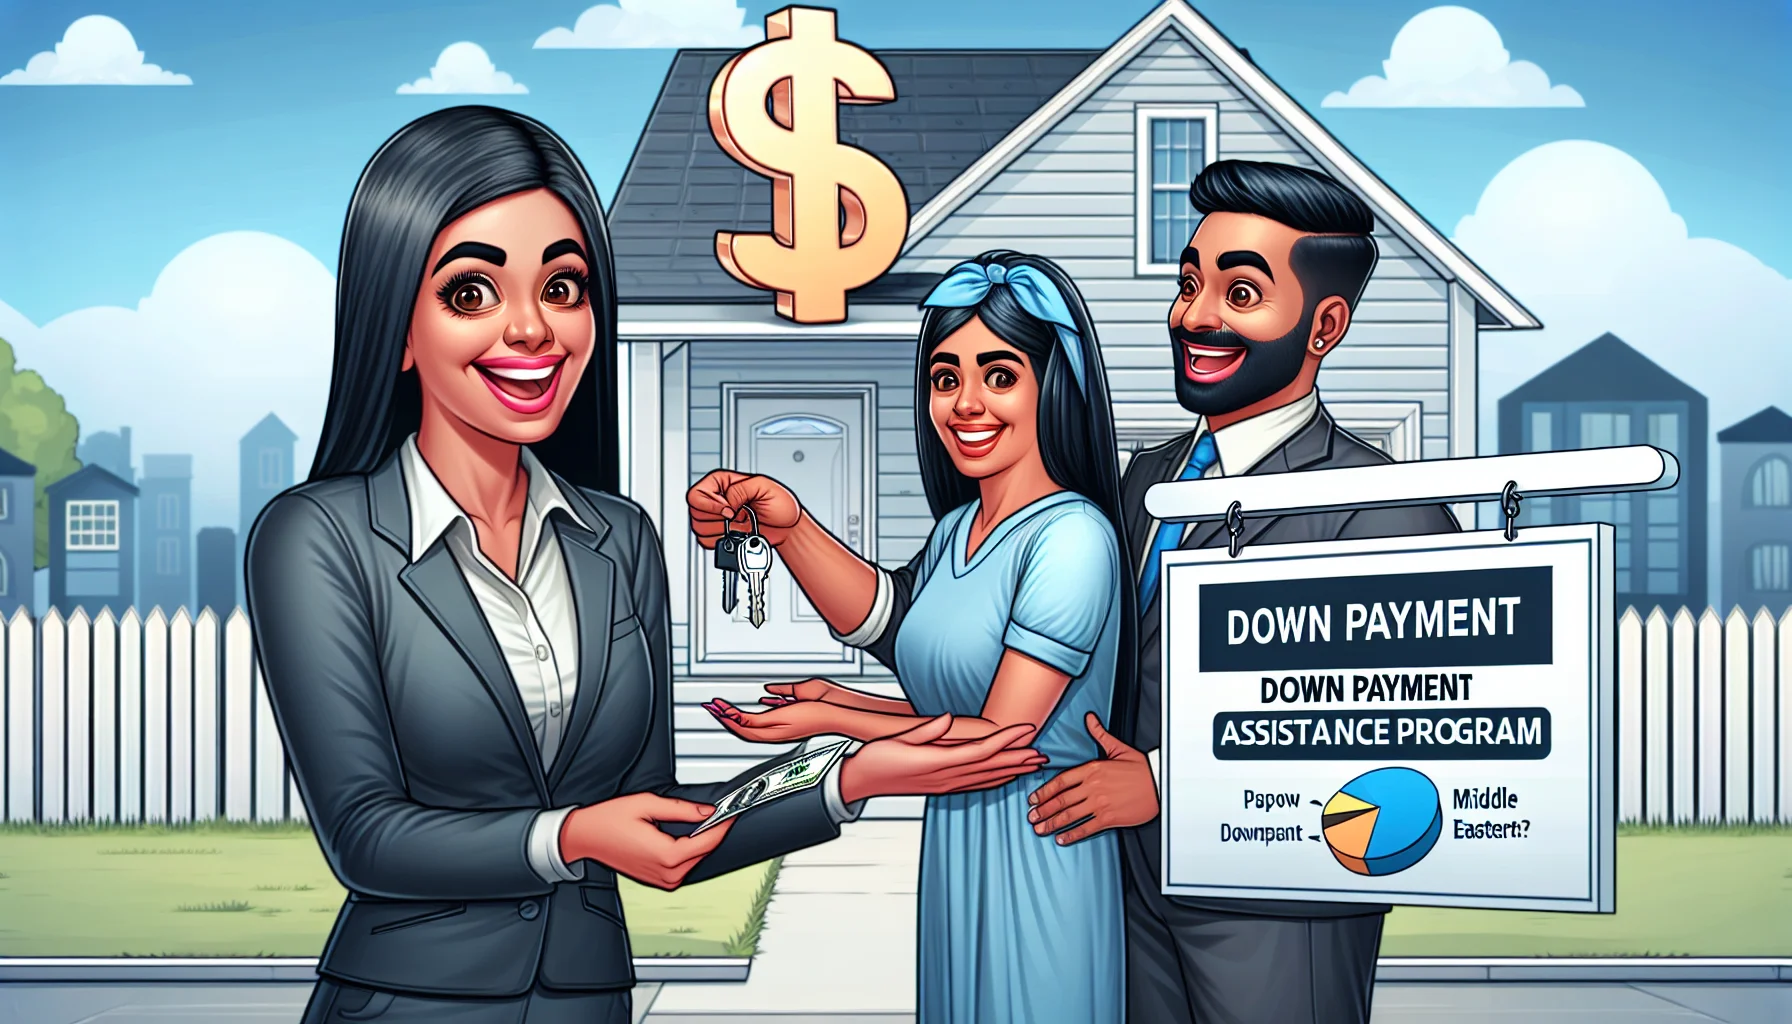 Create a comedic yet realistic image that perfectly represents a down payment assistance program in relation to real estate. Picture a South Asian female real estate agent with a big friendly smile handing keys to a middle-eastern couple, both looking elated. Display a house on the background, with a giant dollar sign flying from the sky onto the house roof as if symbolizing the down payment assistance. Include a small signboard that manages to incorporate a pie chart showing a notably reduced downpayment amount thanks to the assistance program.